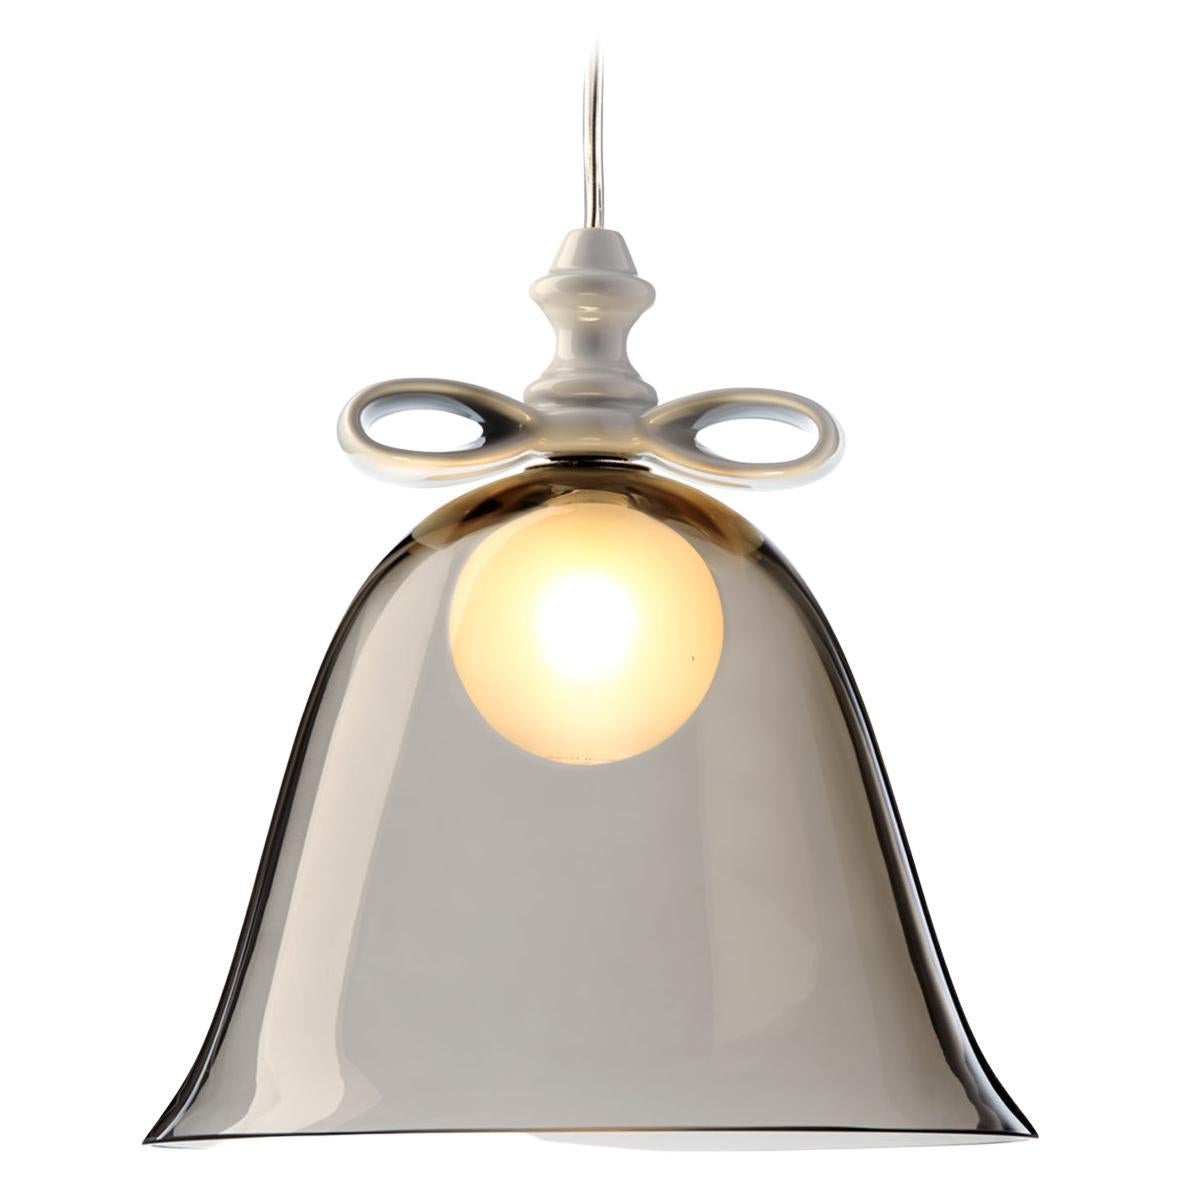 Moooi Bell Large Suspension Lamp in White-Smoke Mouth Blown Glass For Sale